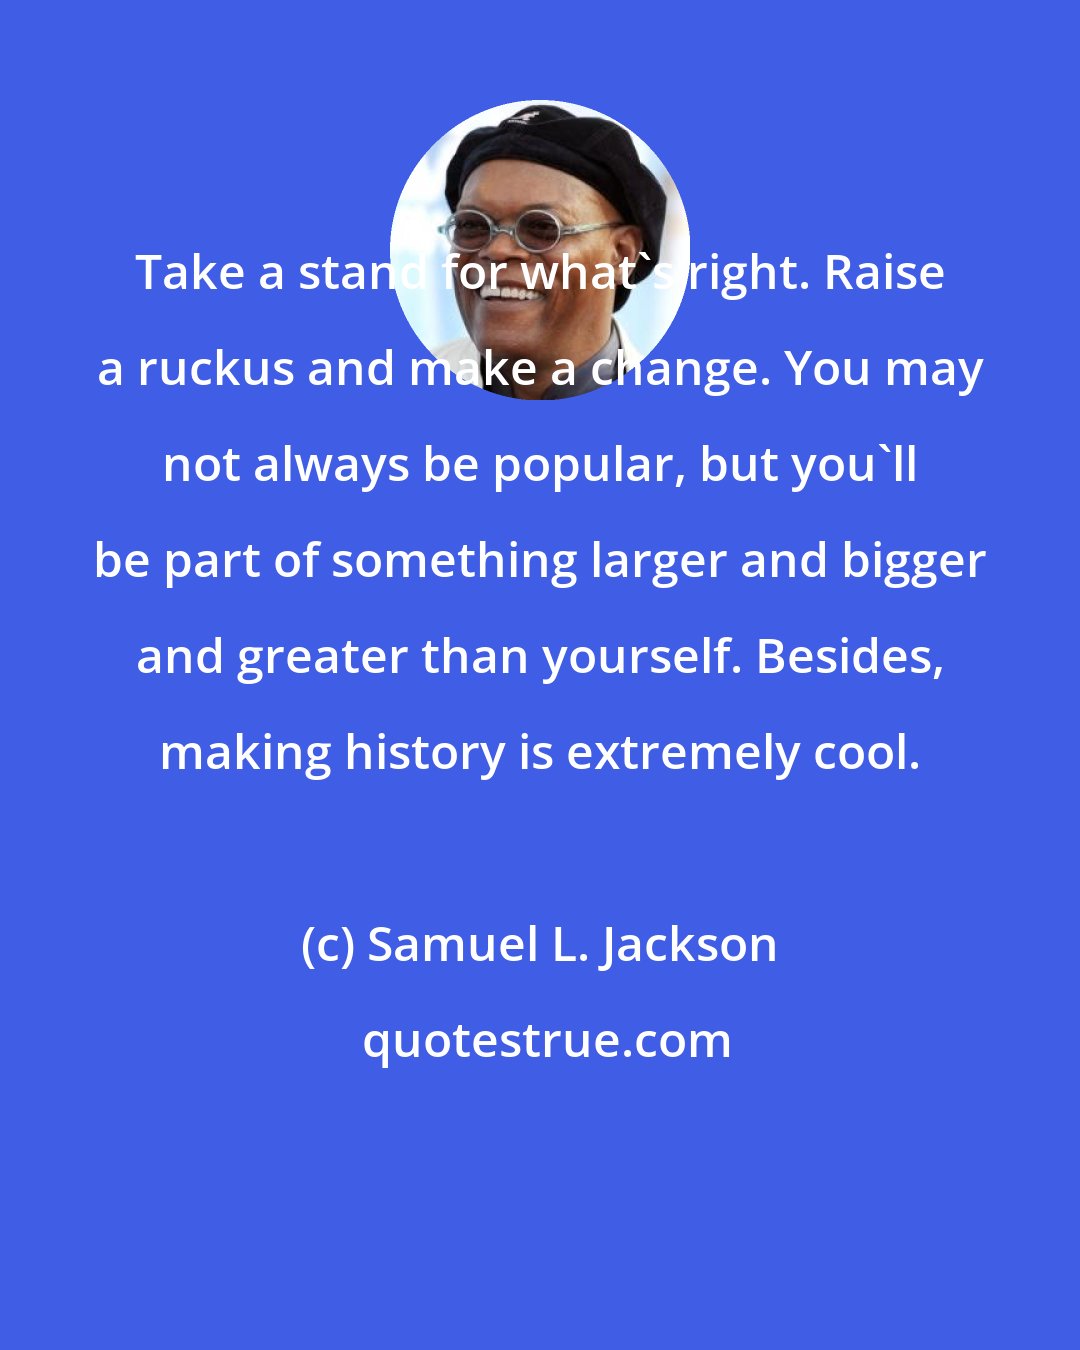 Samuel L. Jackson: Take a stand for what's right. Raise a ruckus and make a change. You may not always be popular, but you'll be part of something larger and bigger and greater than yourself. Besides, making history is extremely cool.